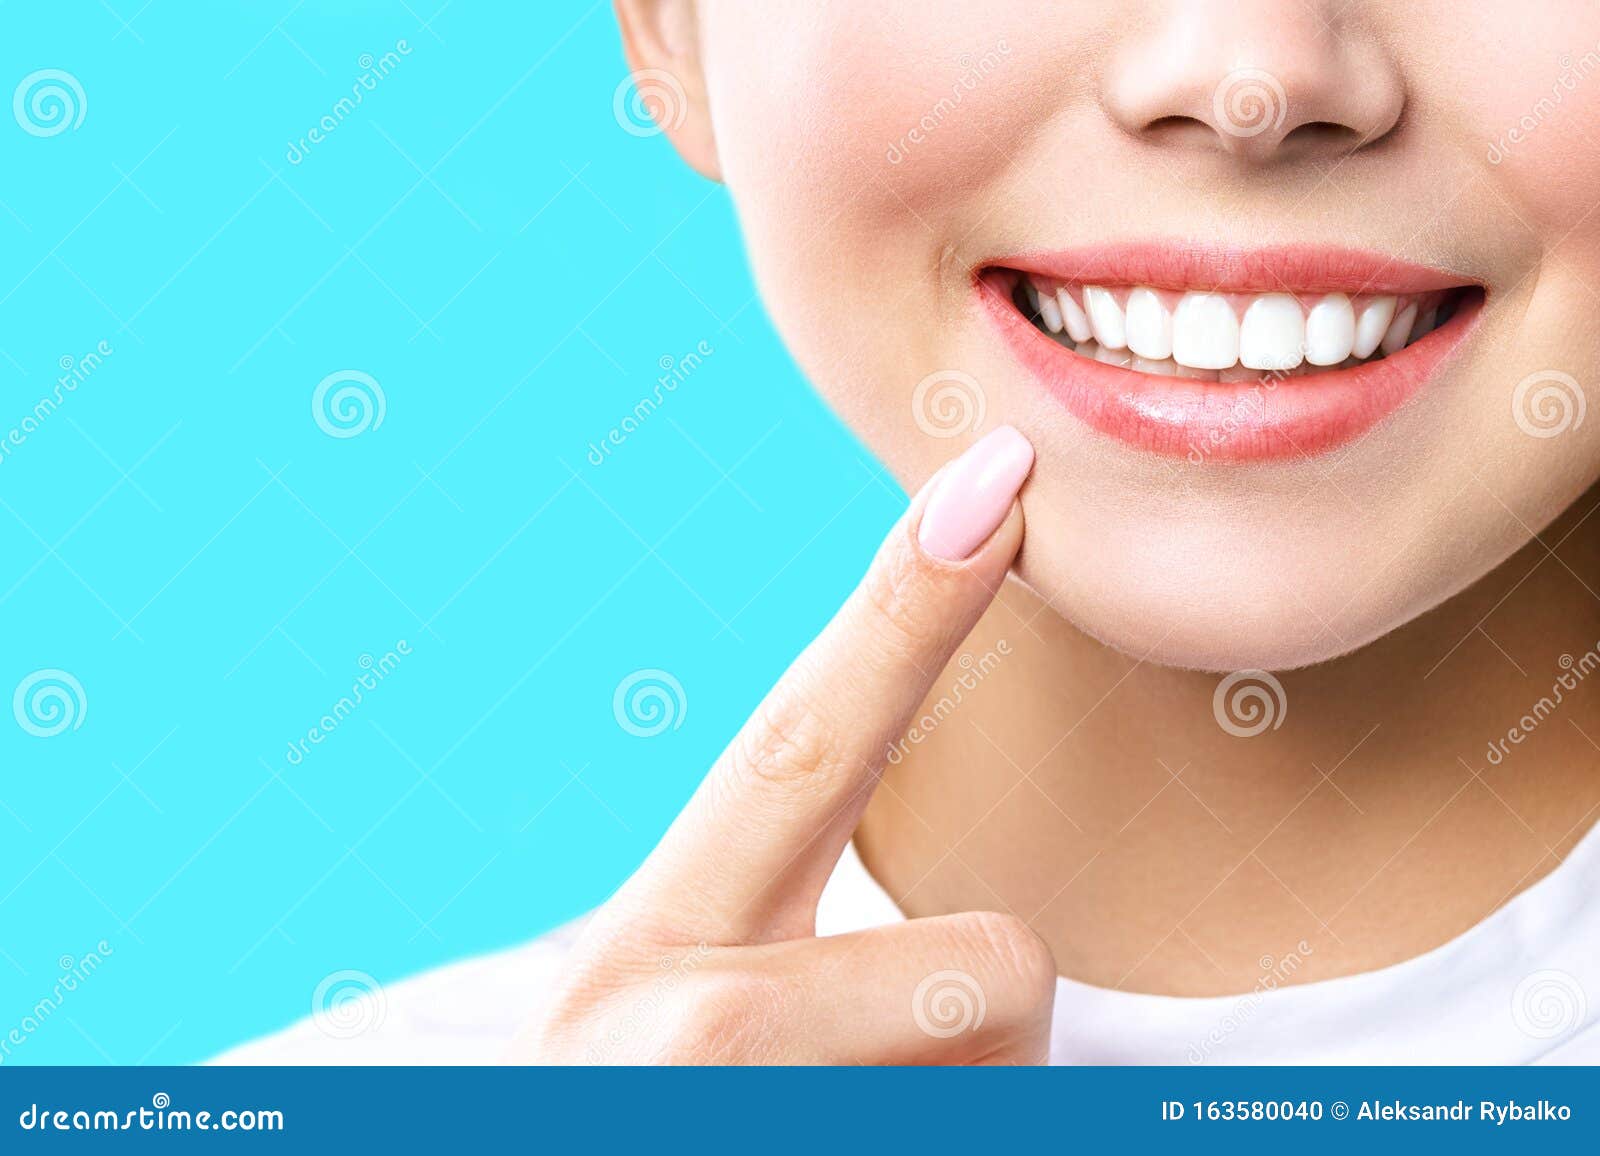 Perfect Healthy Teeth Smile Of A Young Woman Teeth Whitening Dental